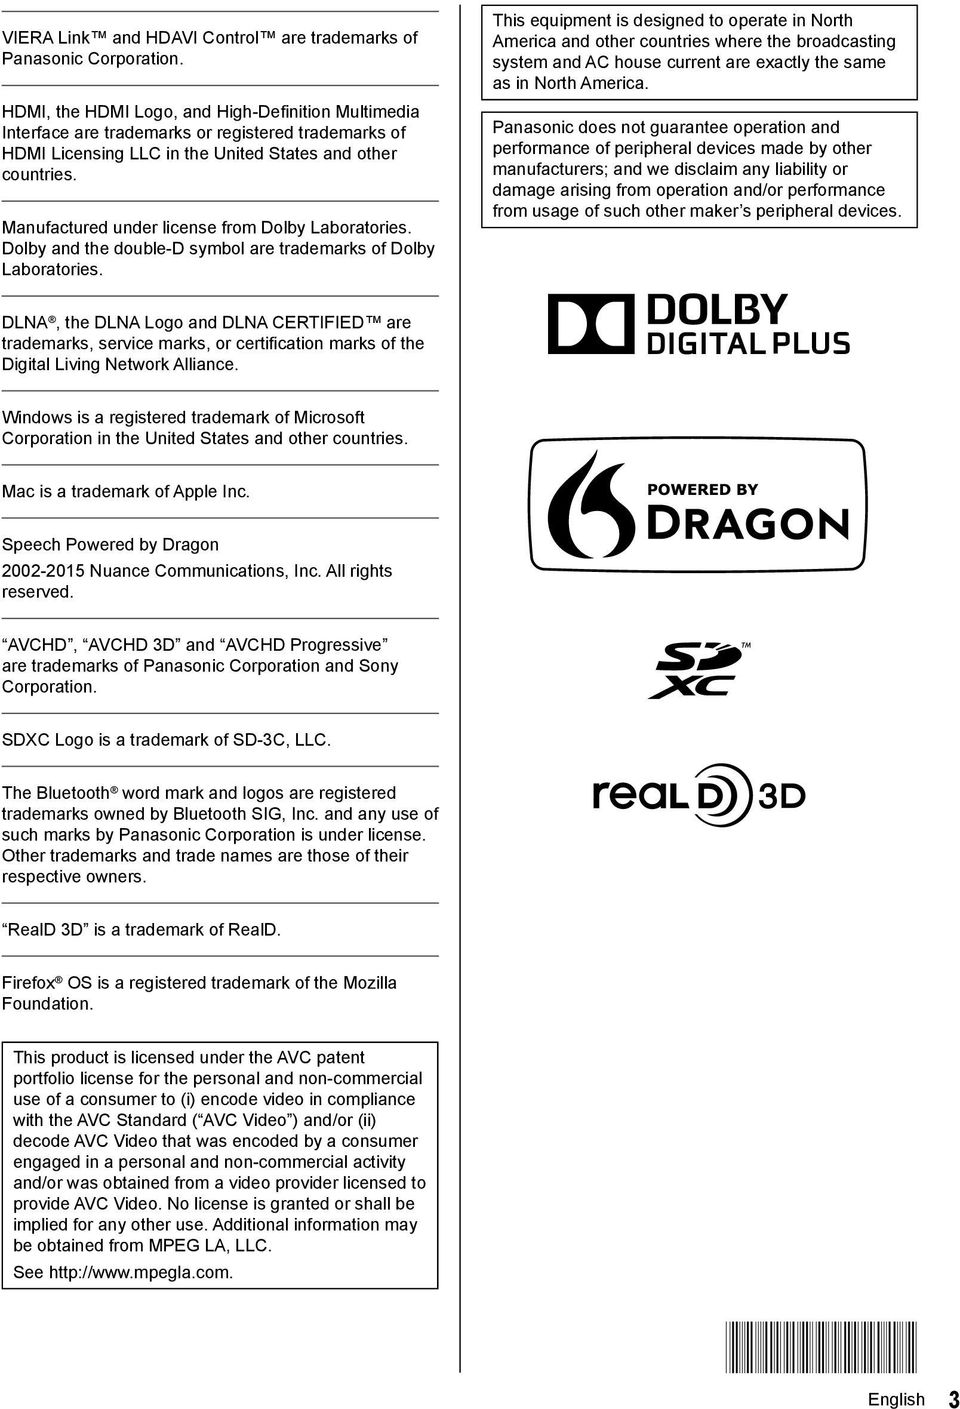 Manufactured under license from Dolby Laboratories. Dolby and the double-d symbol are trademarks of Dolby Laboratories.